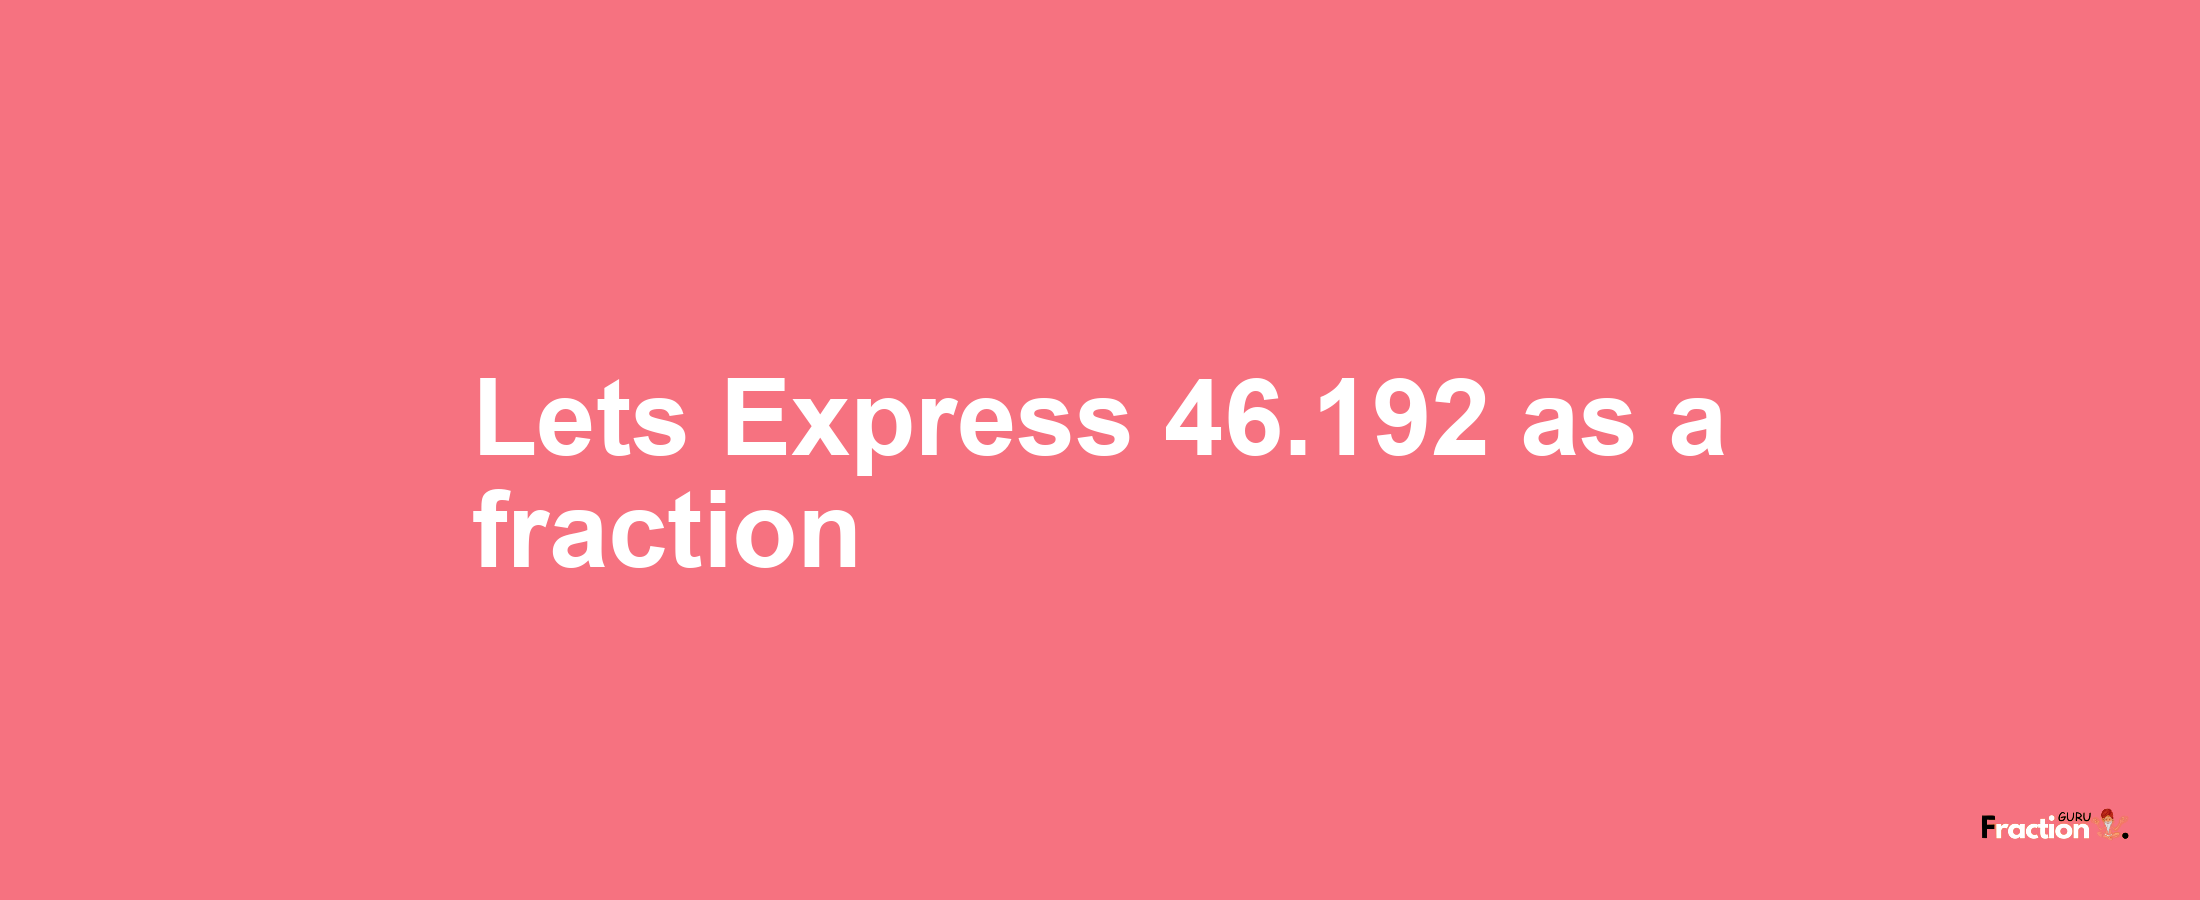 Lets Express 46.192 as afraction